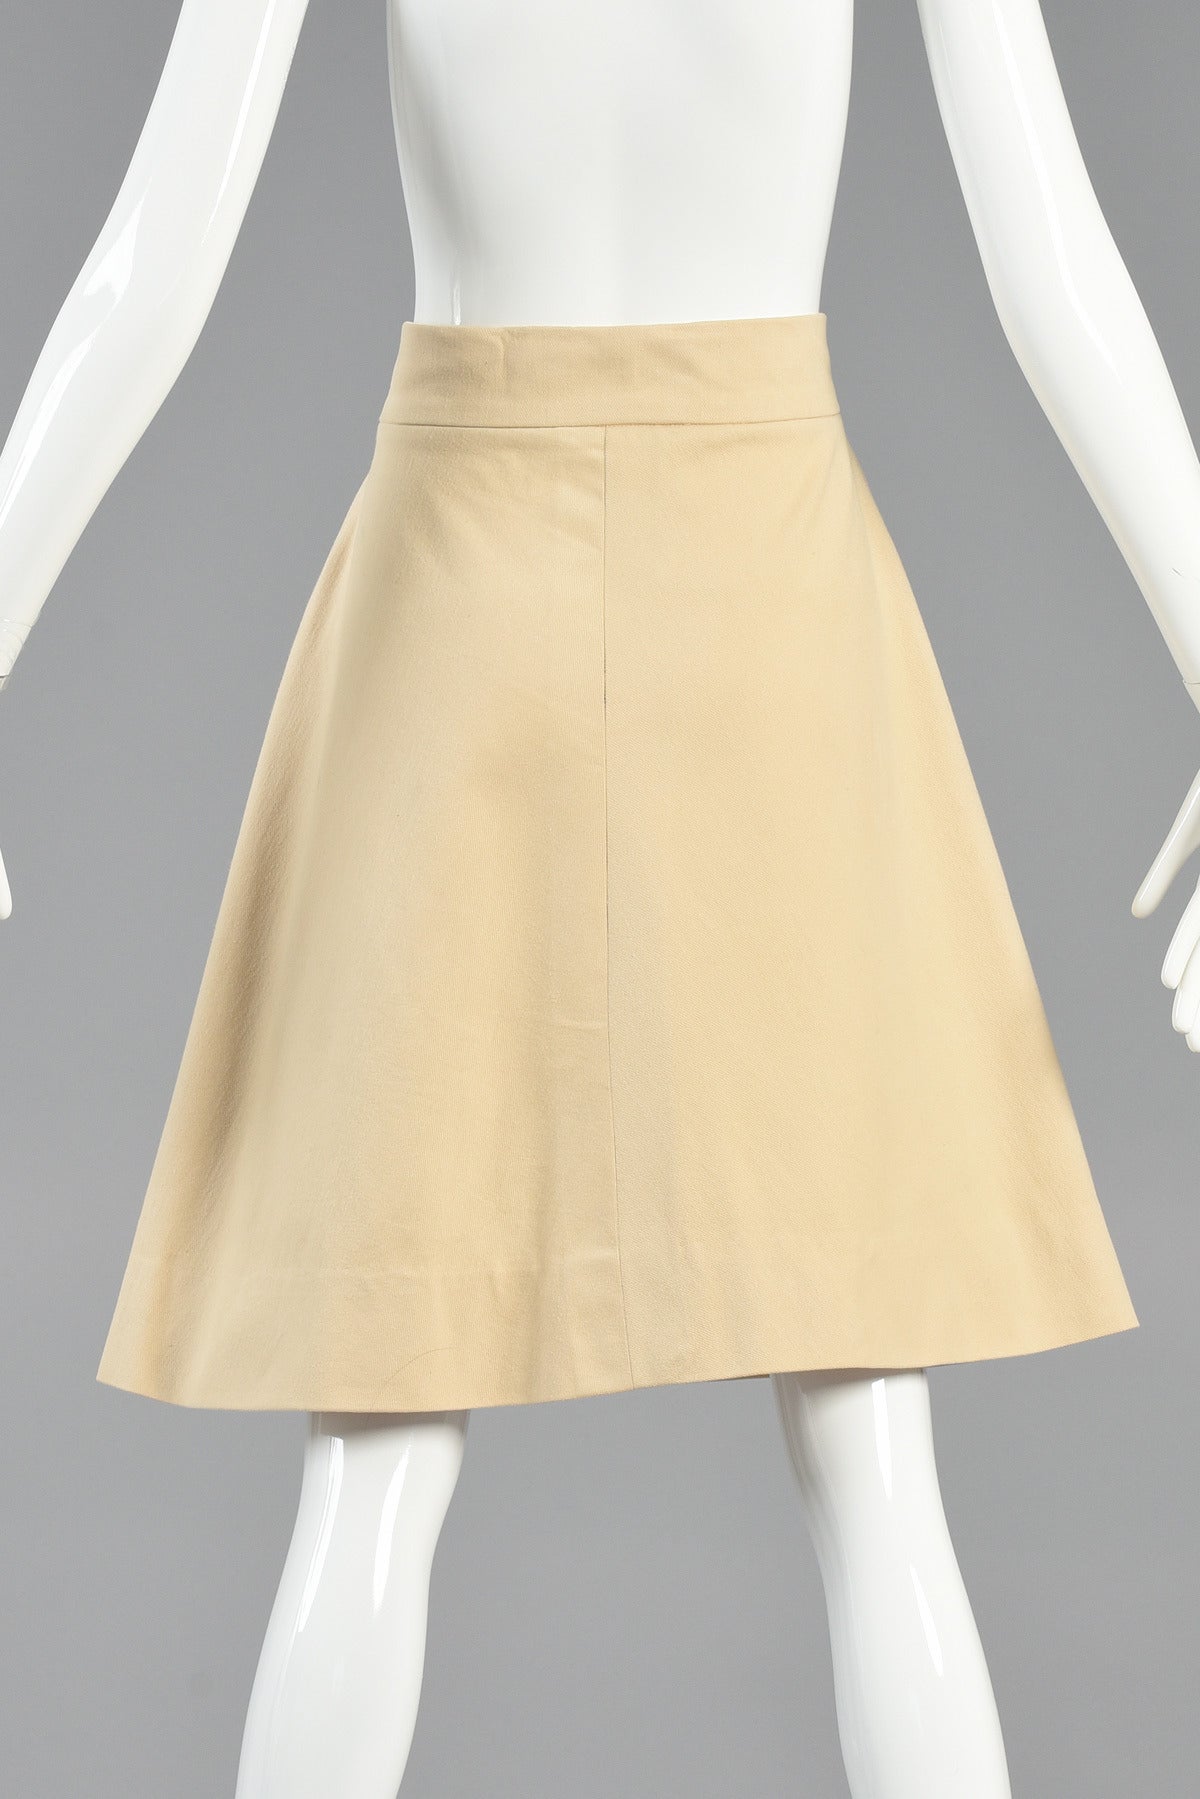 Pierre Cardin 1960's Zip Front Space Age Skirt For Sale 2